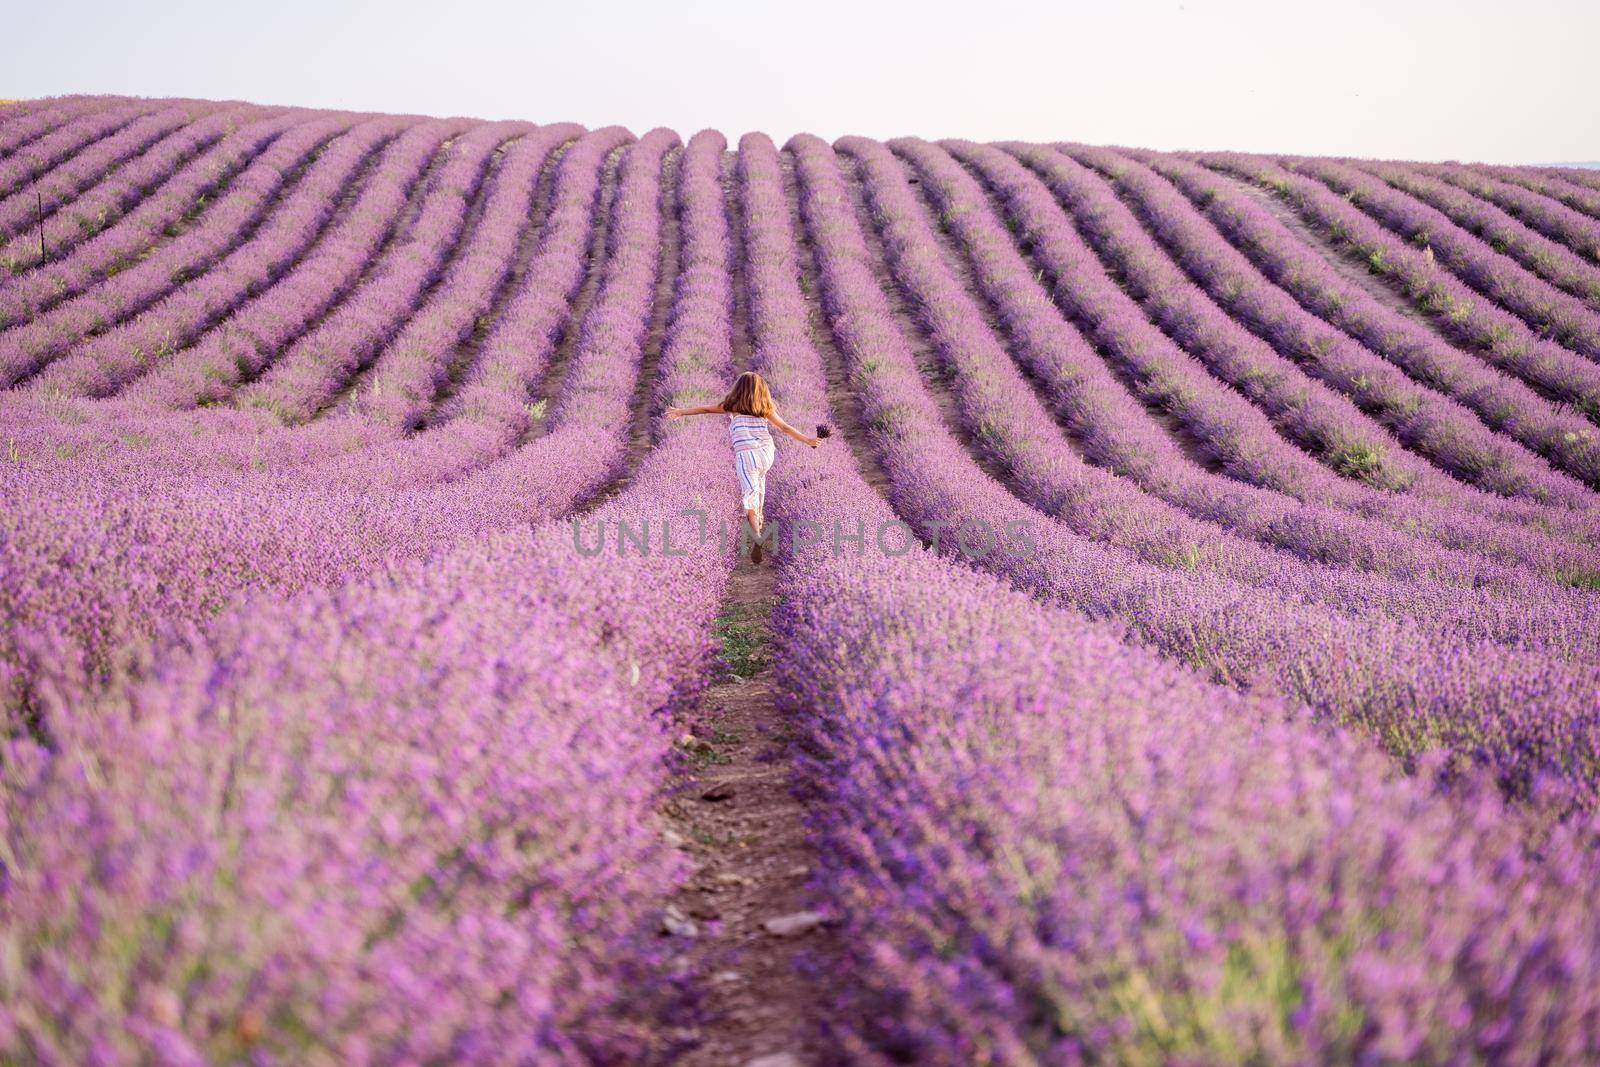 Among the lavender fields. A beautiful girl runs against the background of a large lavender field by Matiunina